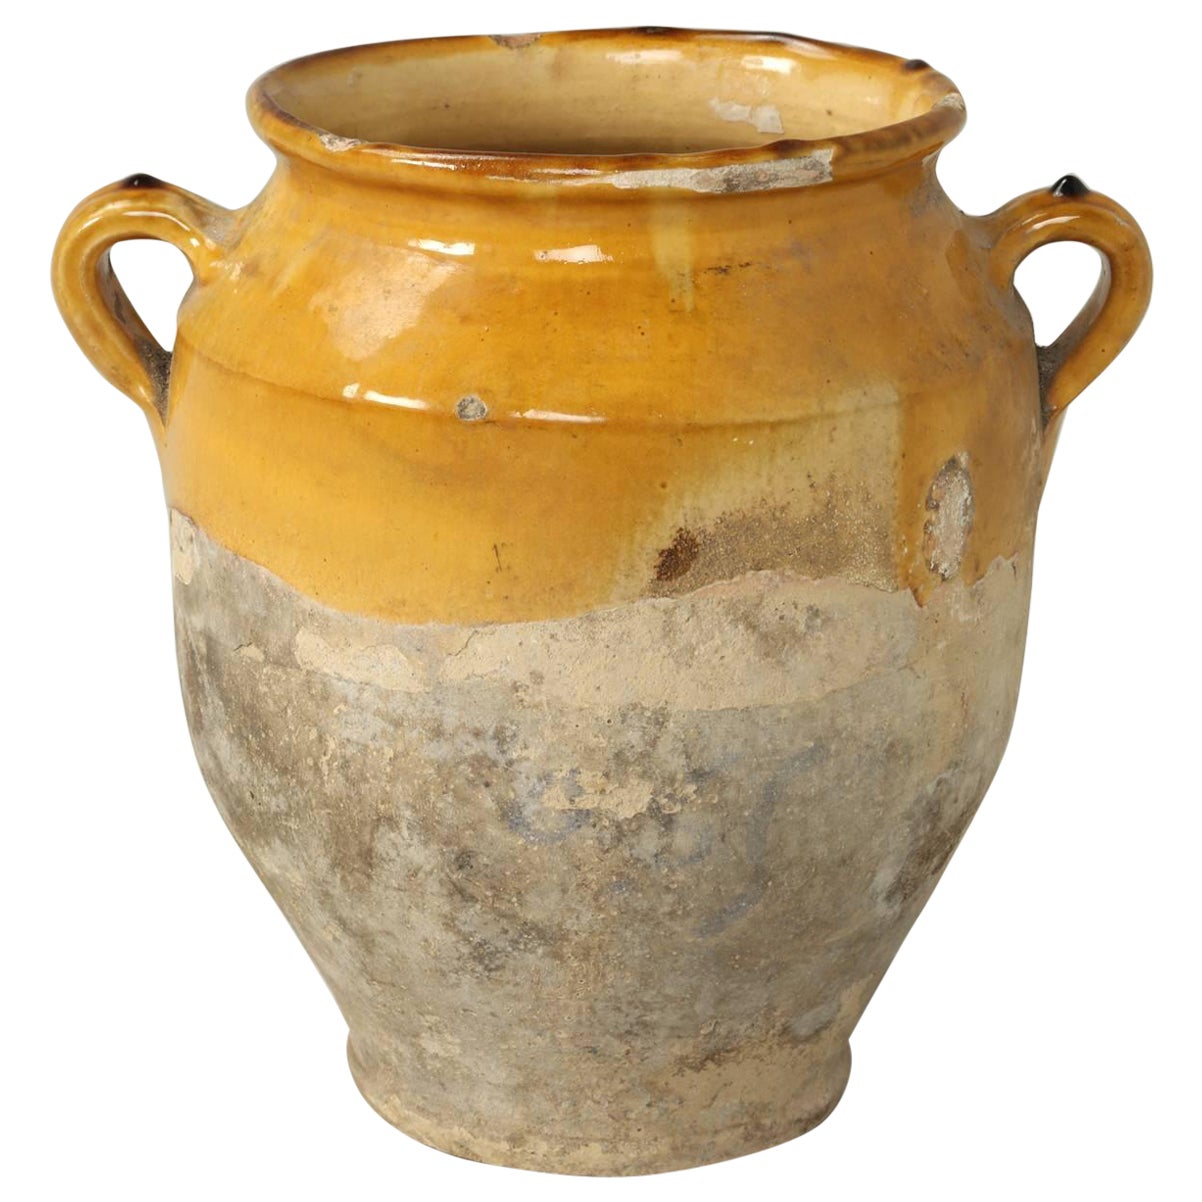 What is pottery made of?